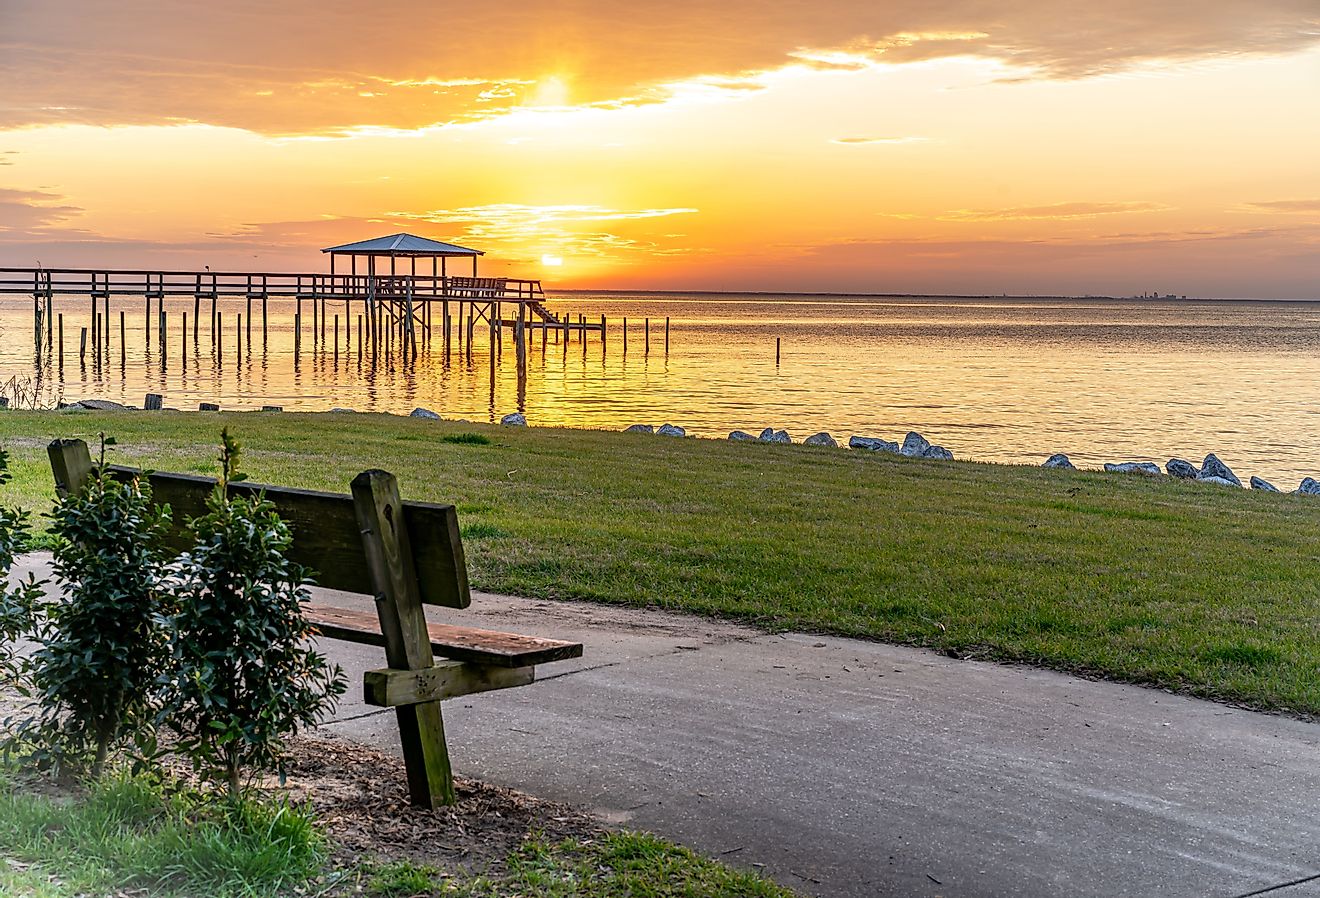 A sunset view at Fairhope, Alabama.